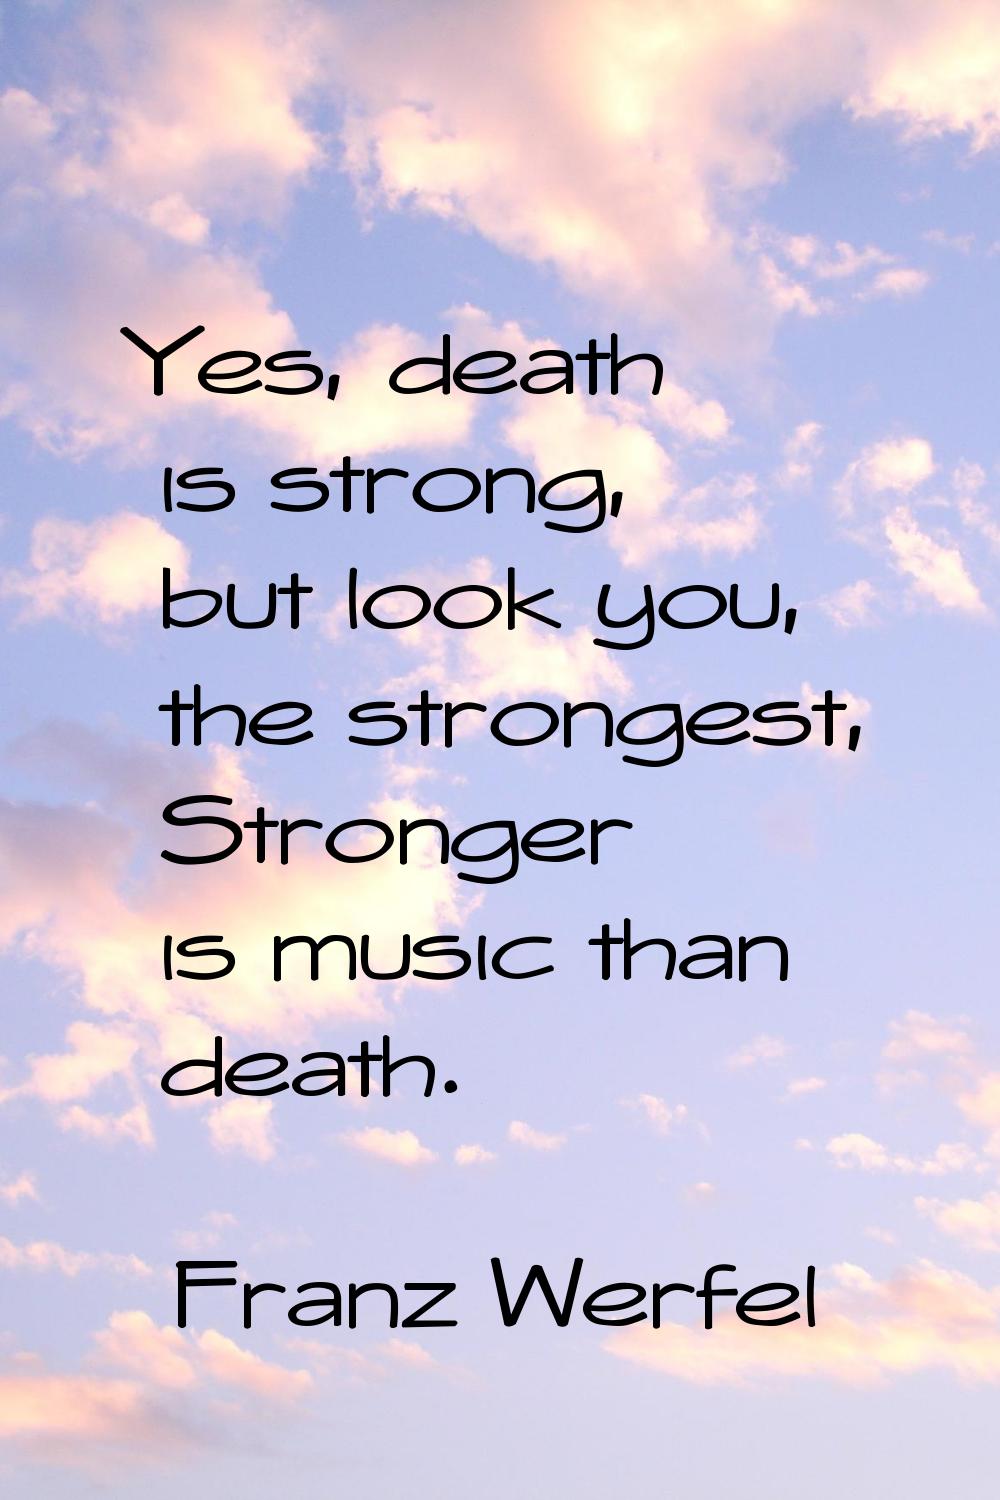 Yes, death is strong, but look you, the strongest, Stronger is music than death.